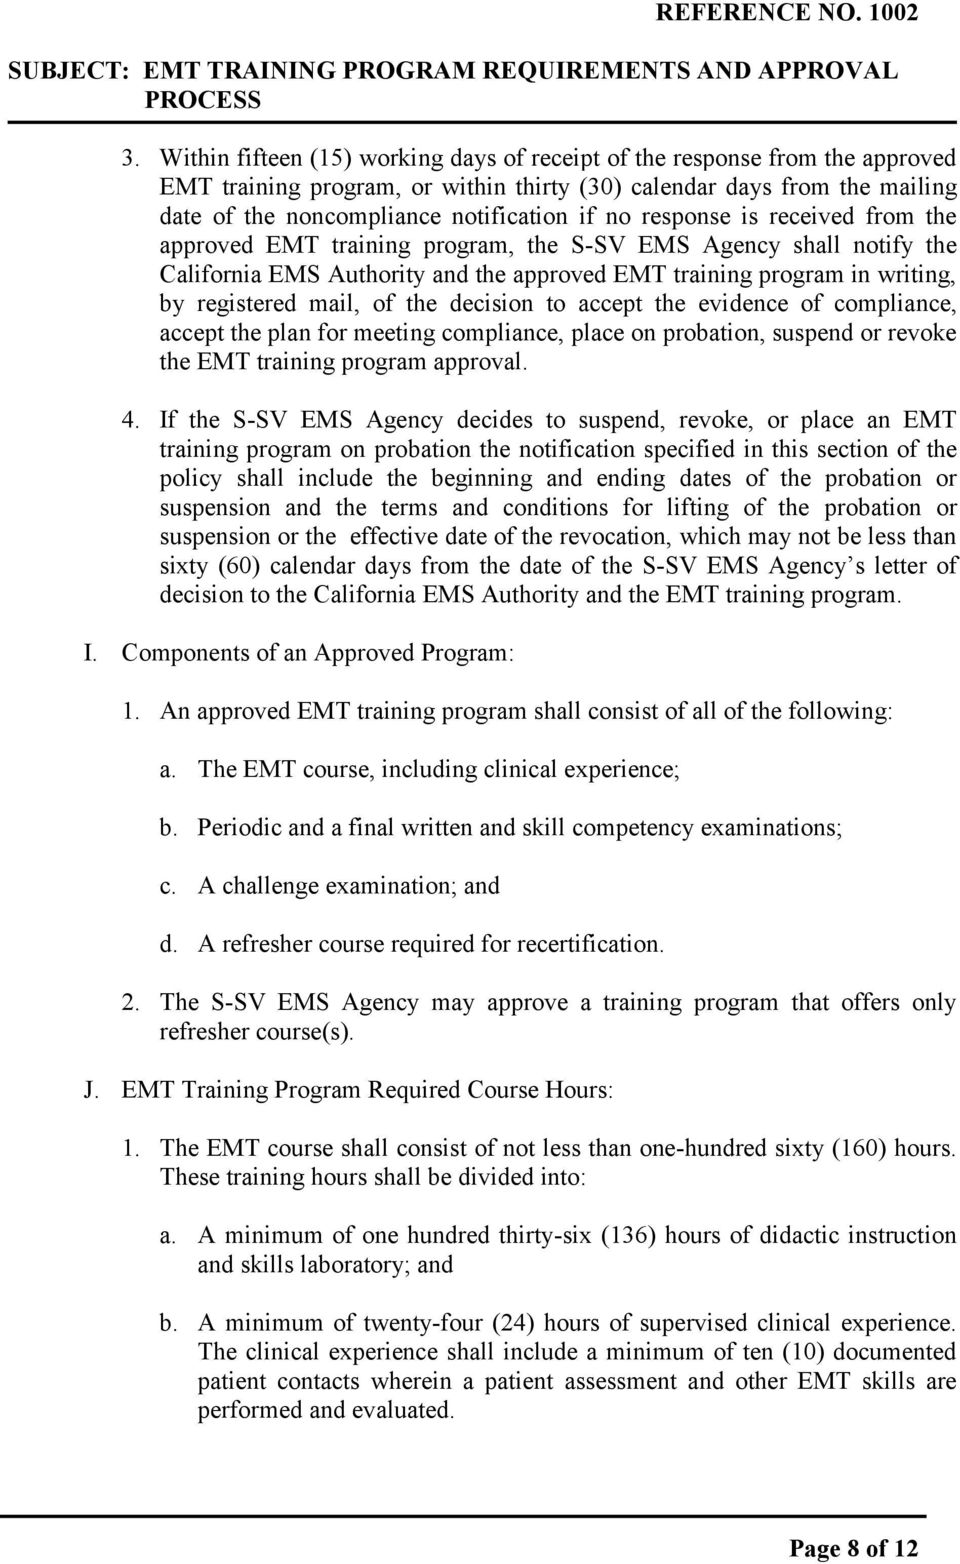 response is received from the approved EMT training program, the S-SV EMS Agency shall notify the California EMS Authority and the approved EMT training program in writing, by registered mail, of the